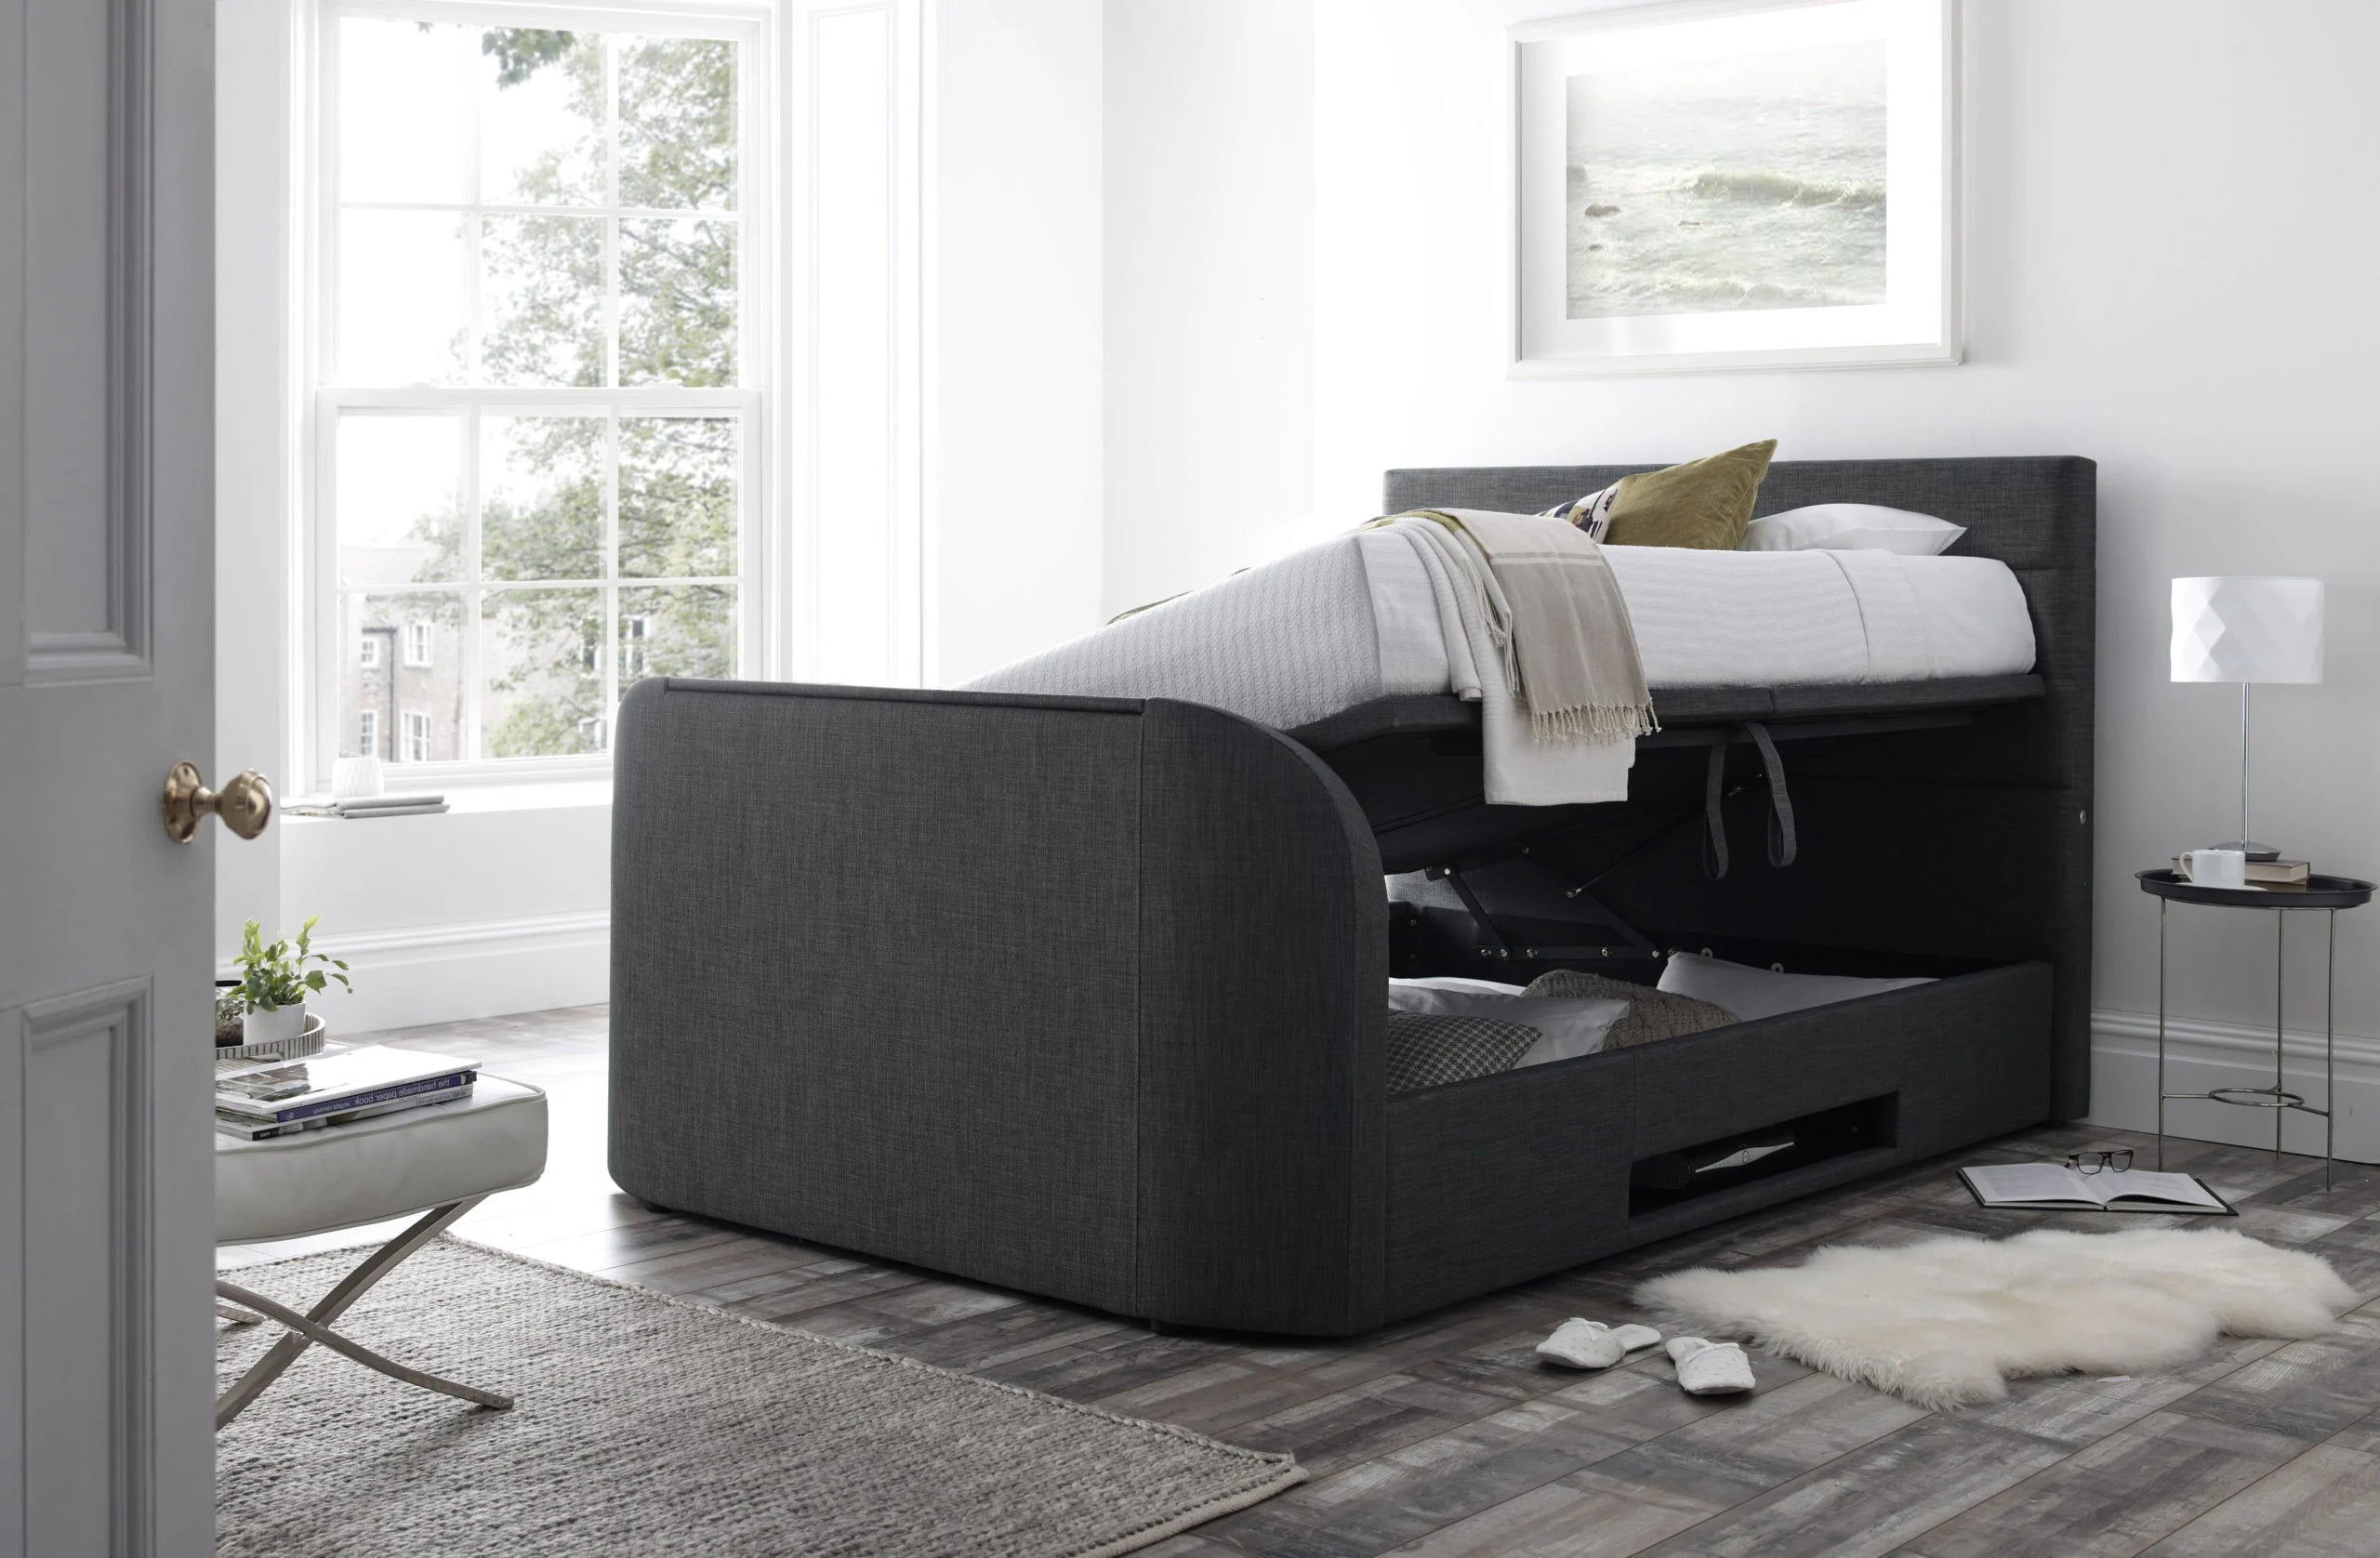 Double Ottoman Bed